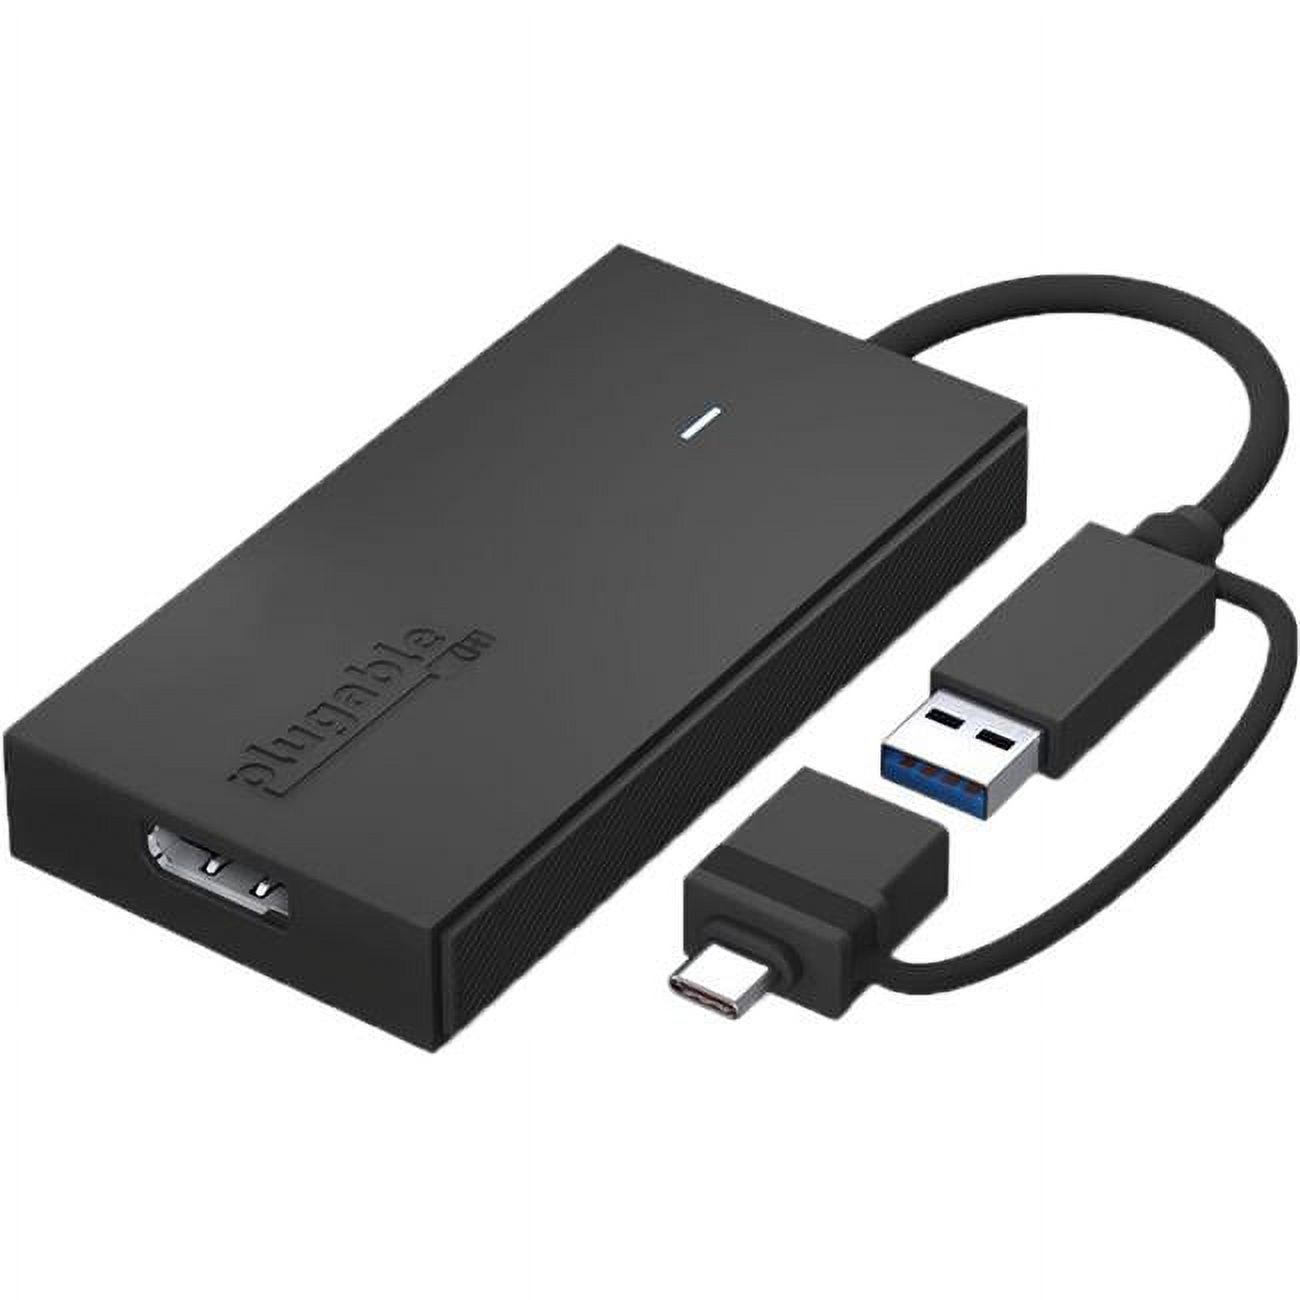 Plugable USB C to DisplayPort Adapter, Universal Video Graphics Adapter for USB 3.0 and USB-C Macs and Windows, Extend a DisplayPort Monitor up to 1080p@60Hz - image 1 of 7